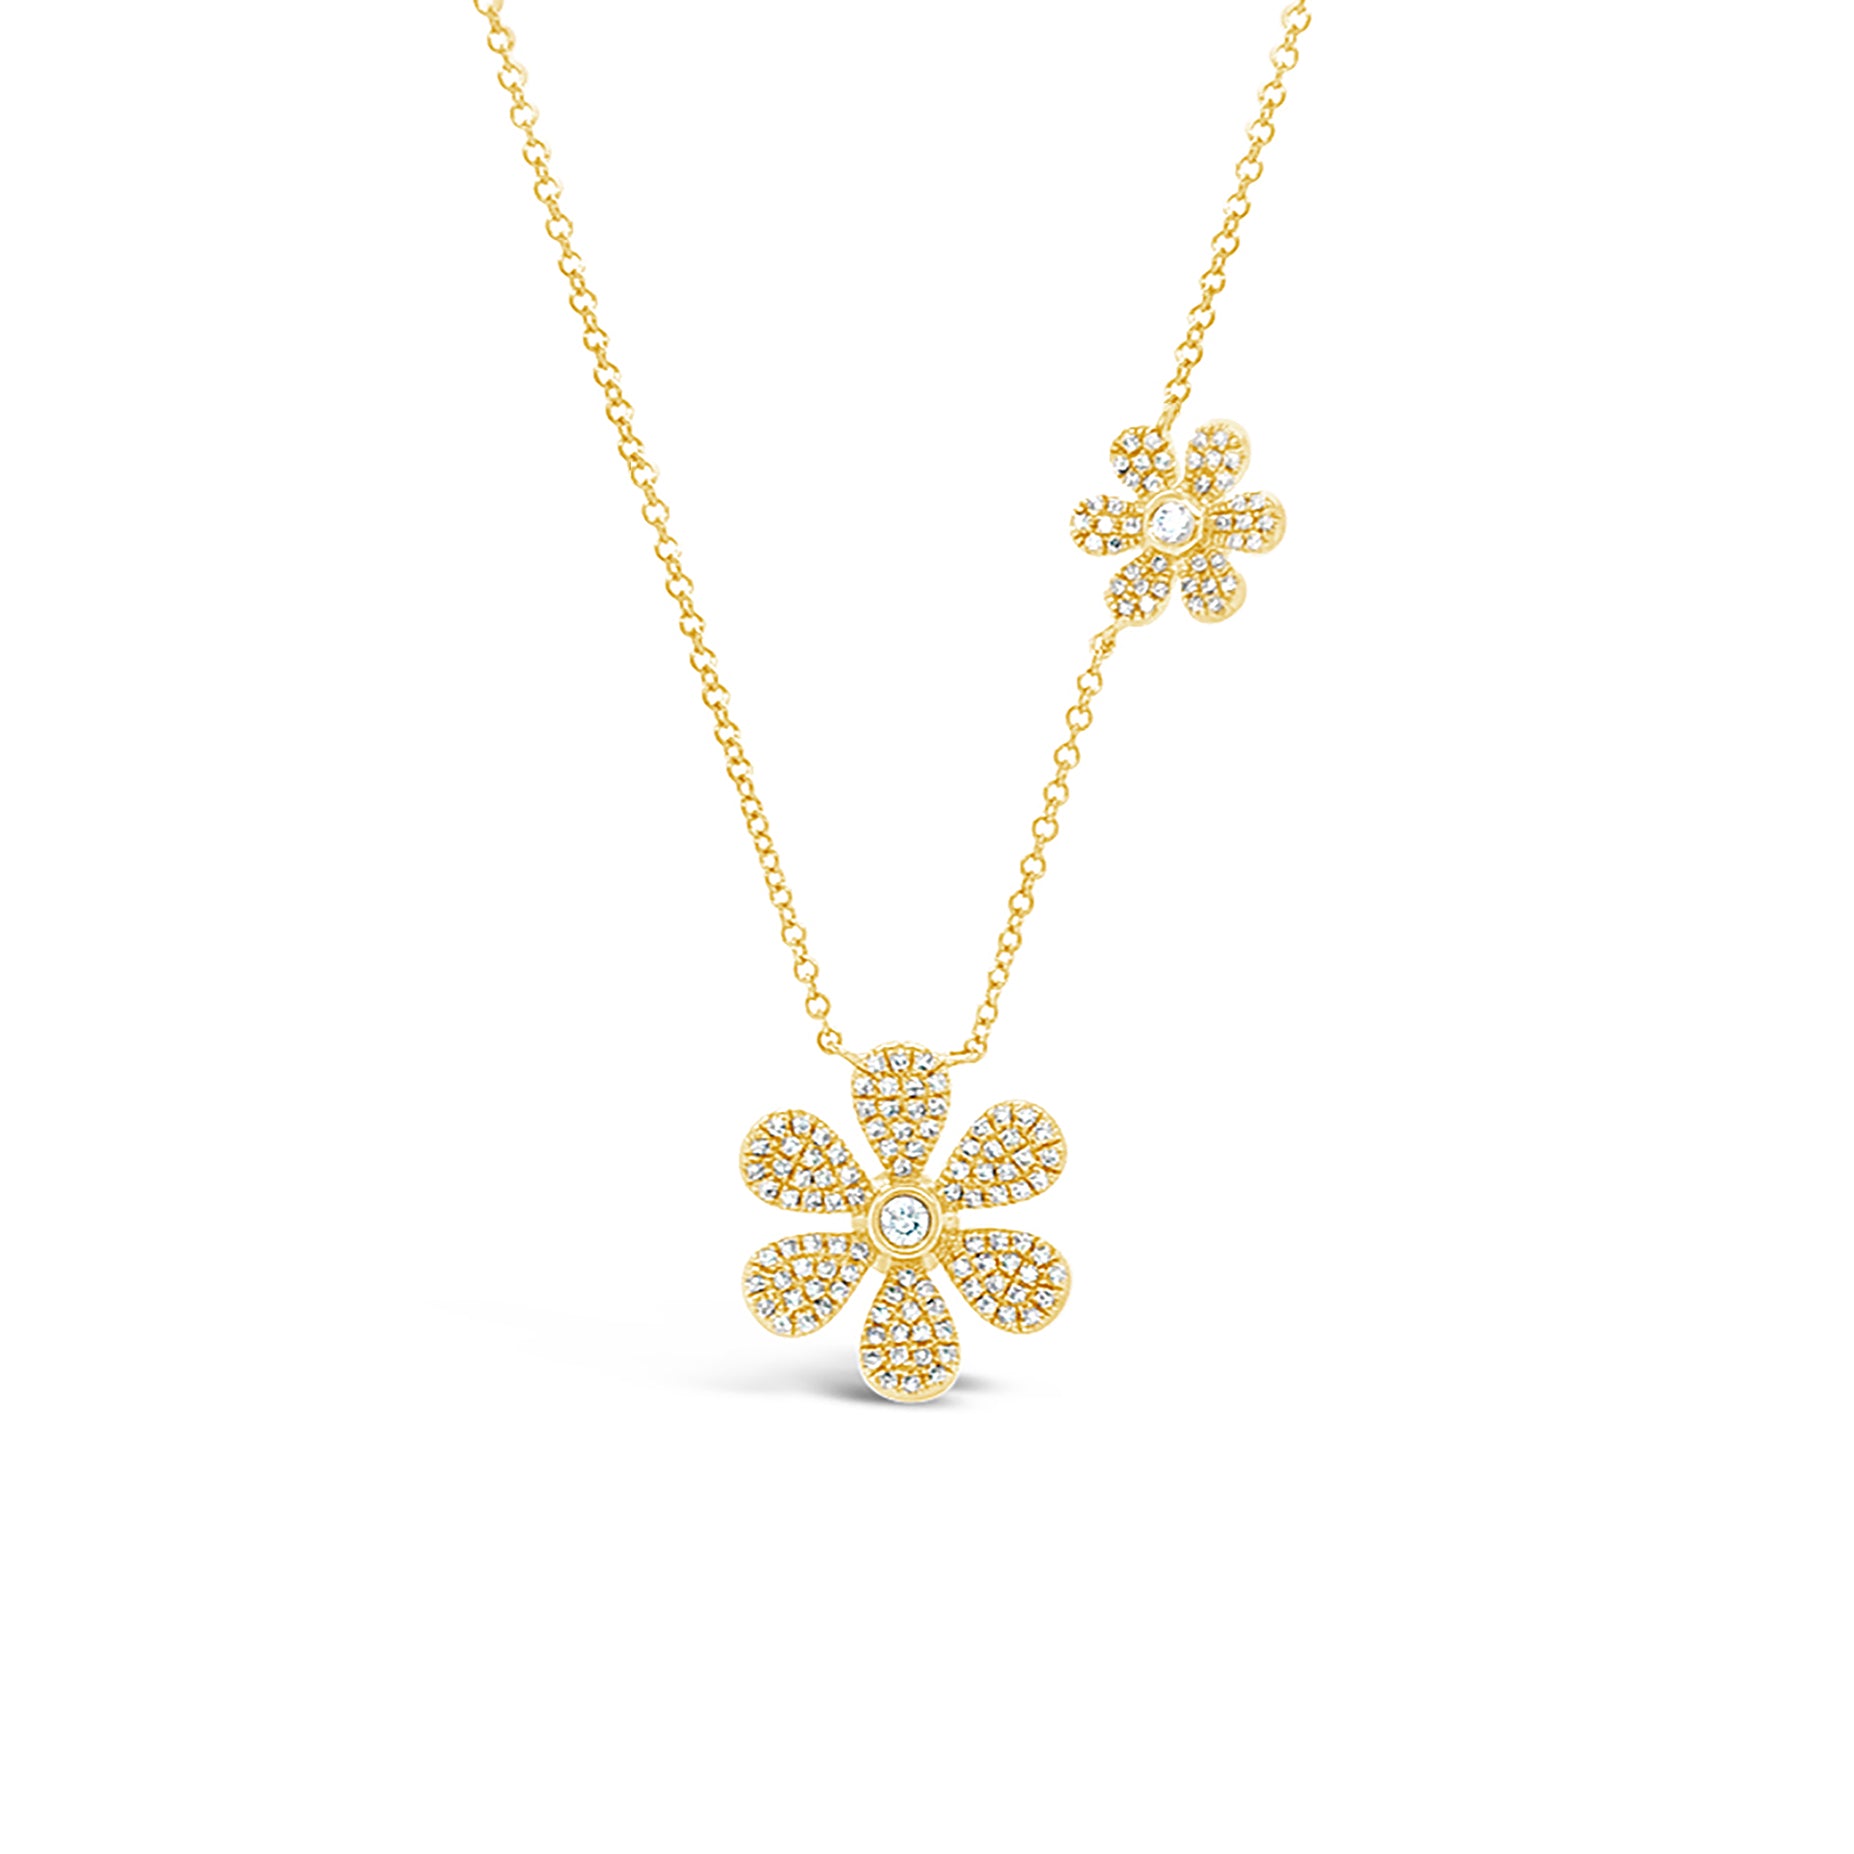 Pave Diamond Double Daisy Necklace  -14K gold weighing 3.48 grams  -146 round diamonds totaling 0.39 carats  -2 round diamonds totaling .05 carats